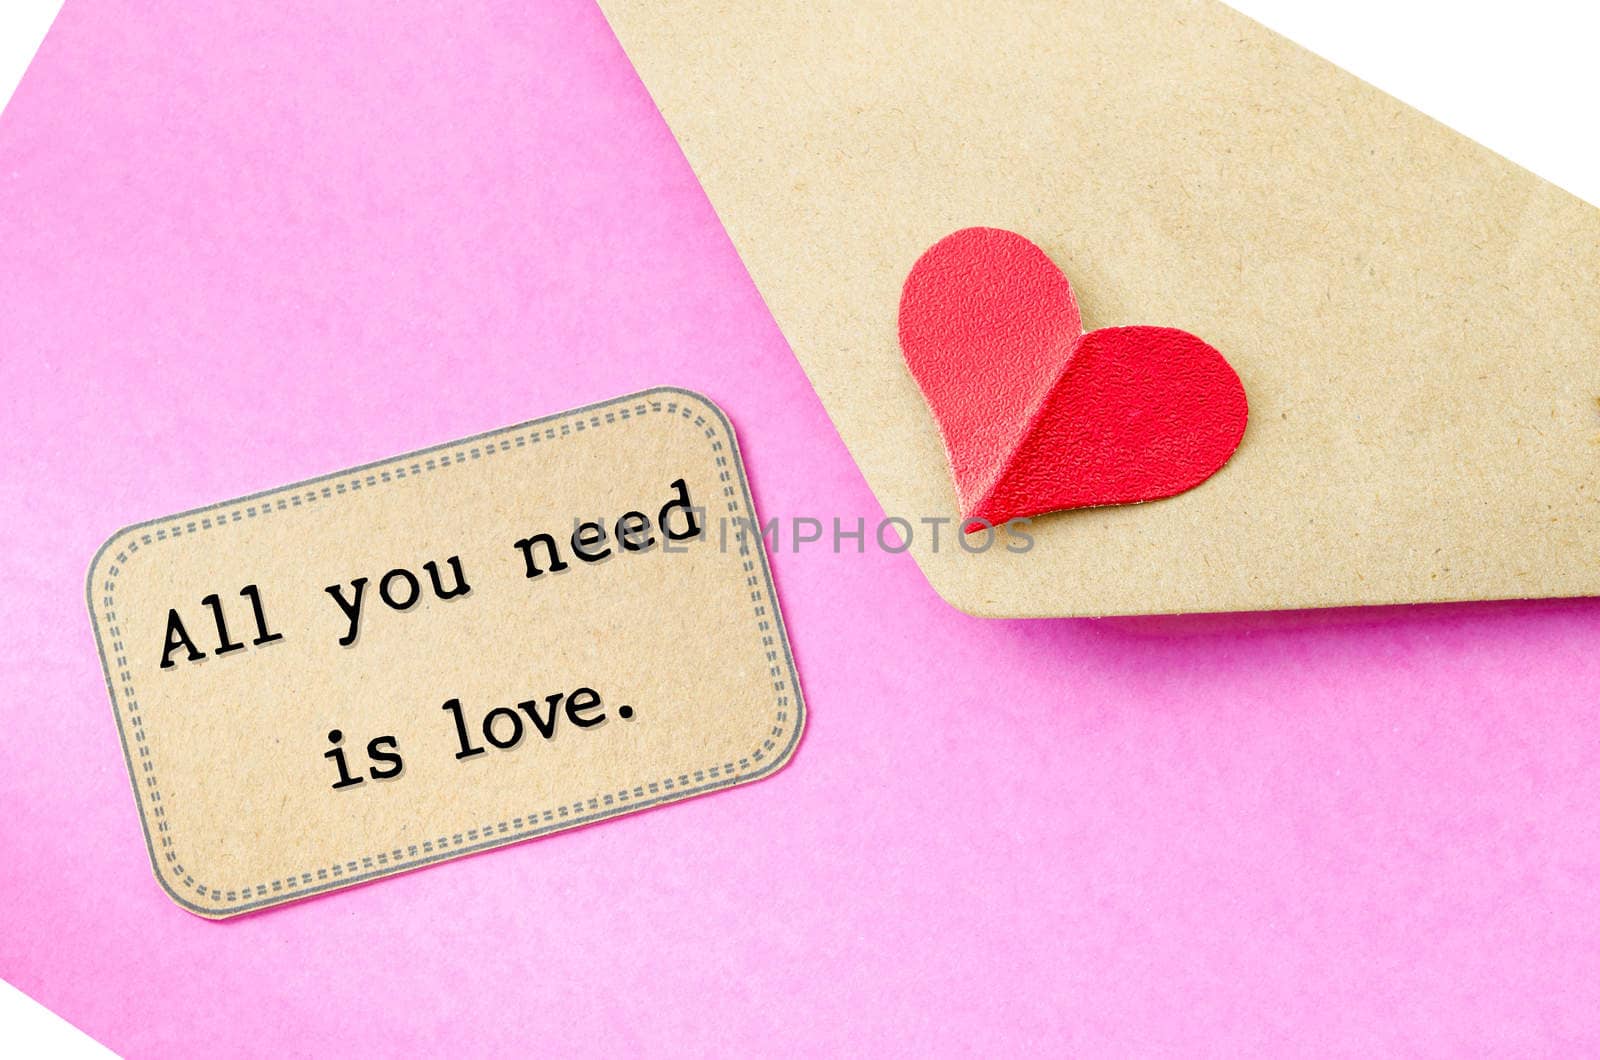 All you need is love. Love letter and wording with text love on white background.